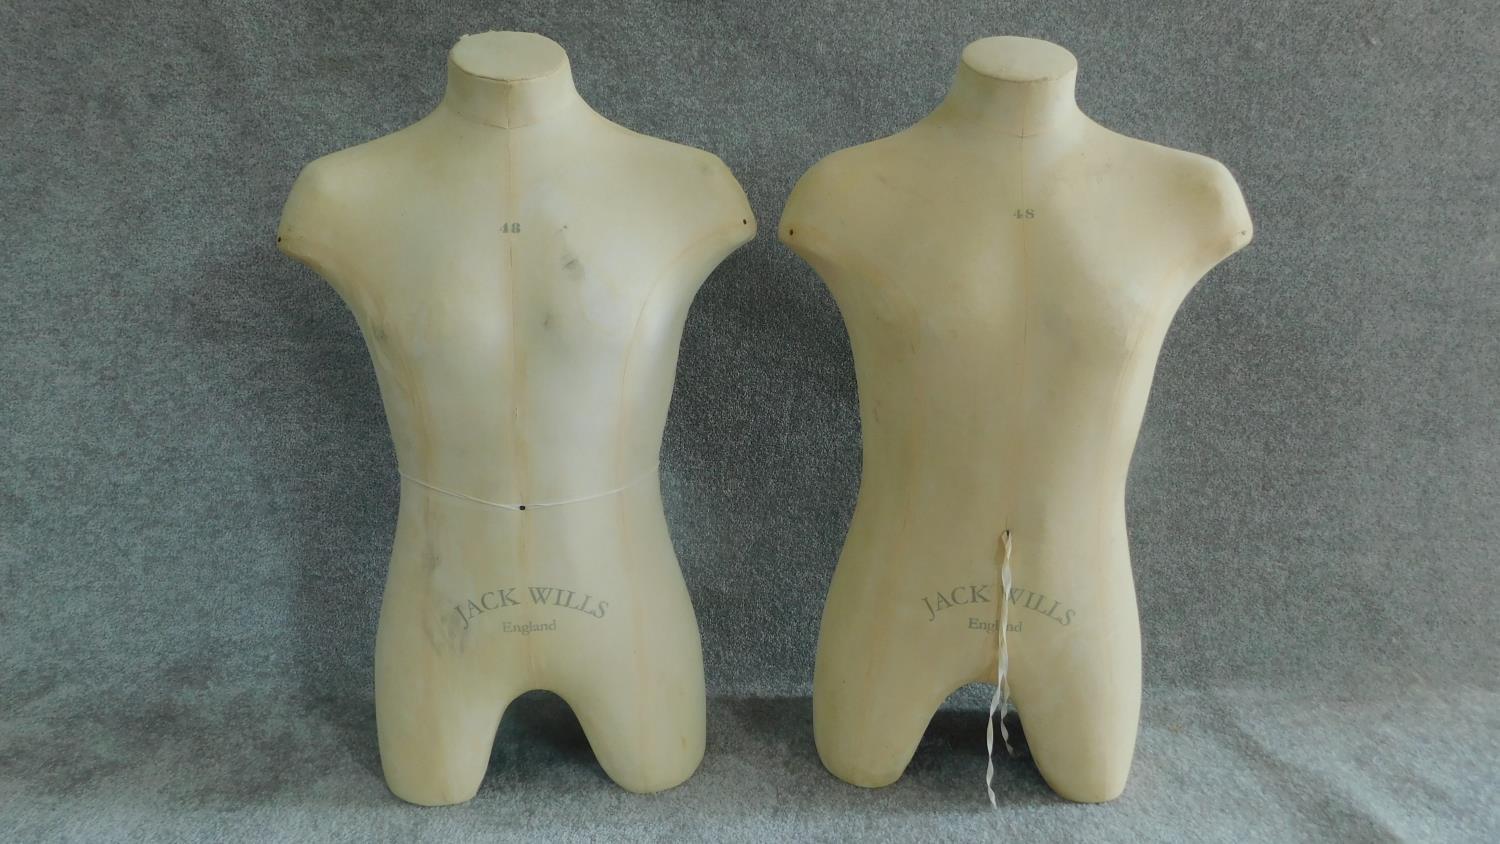 A pair of Jack Wills male mannequins. H.81cm